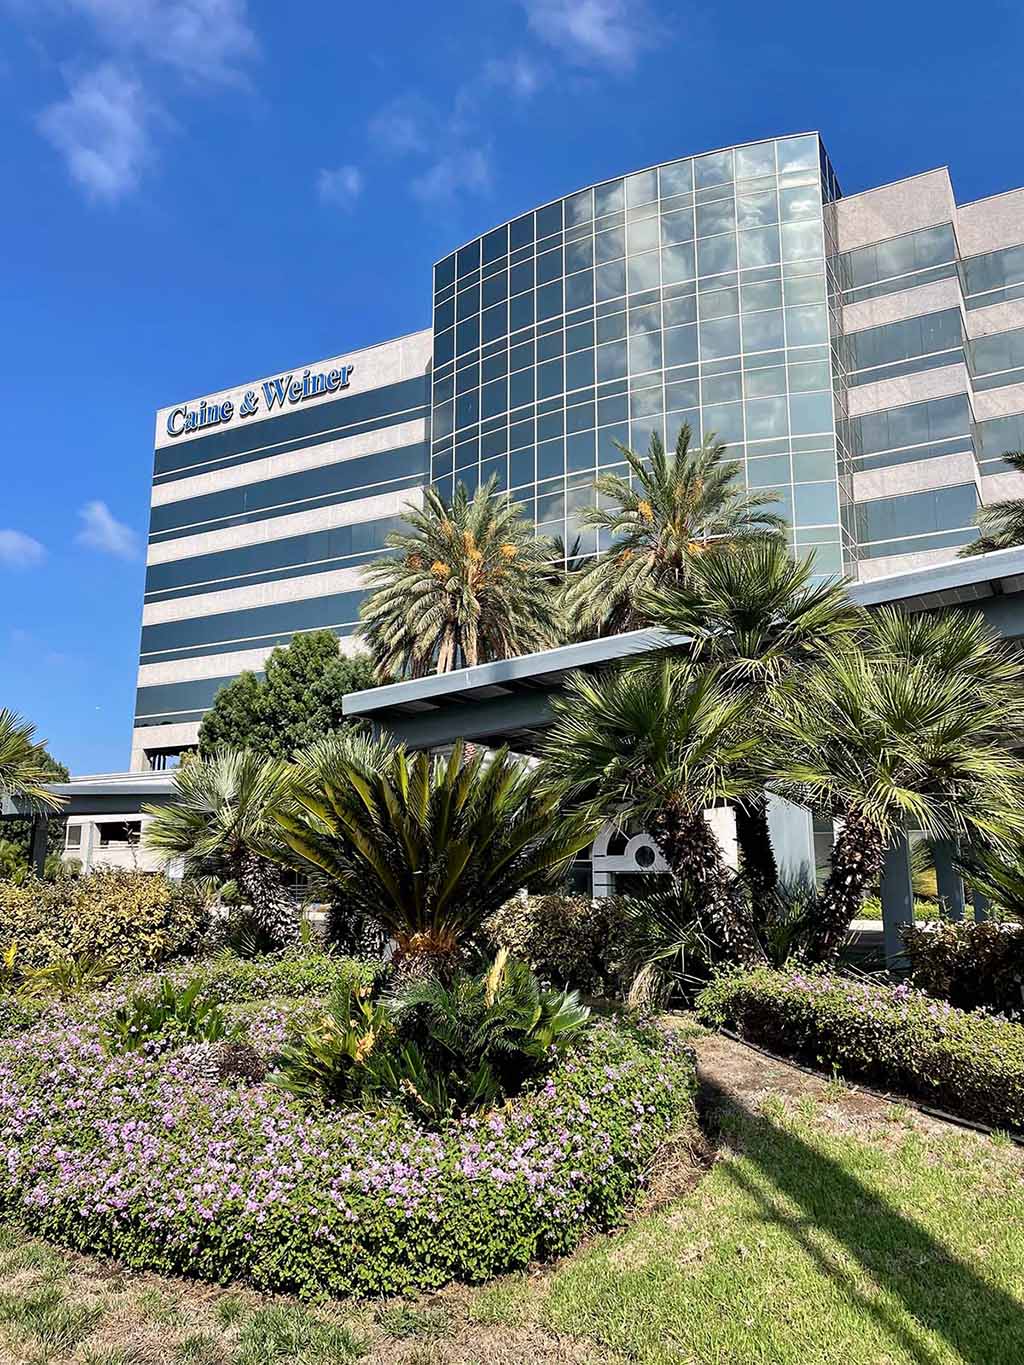 Southern California Multi-Specialty Center serves patients from Brentwood